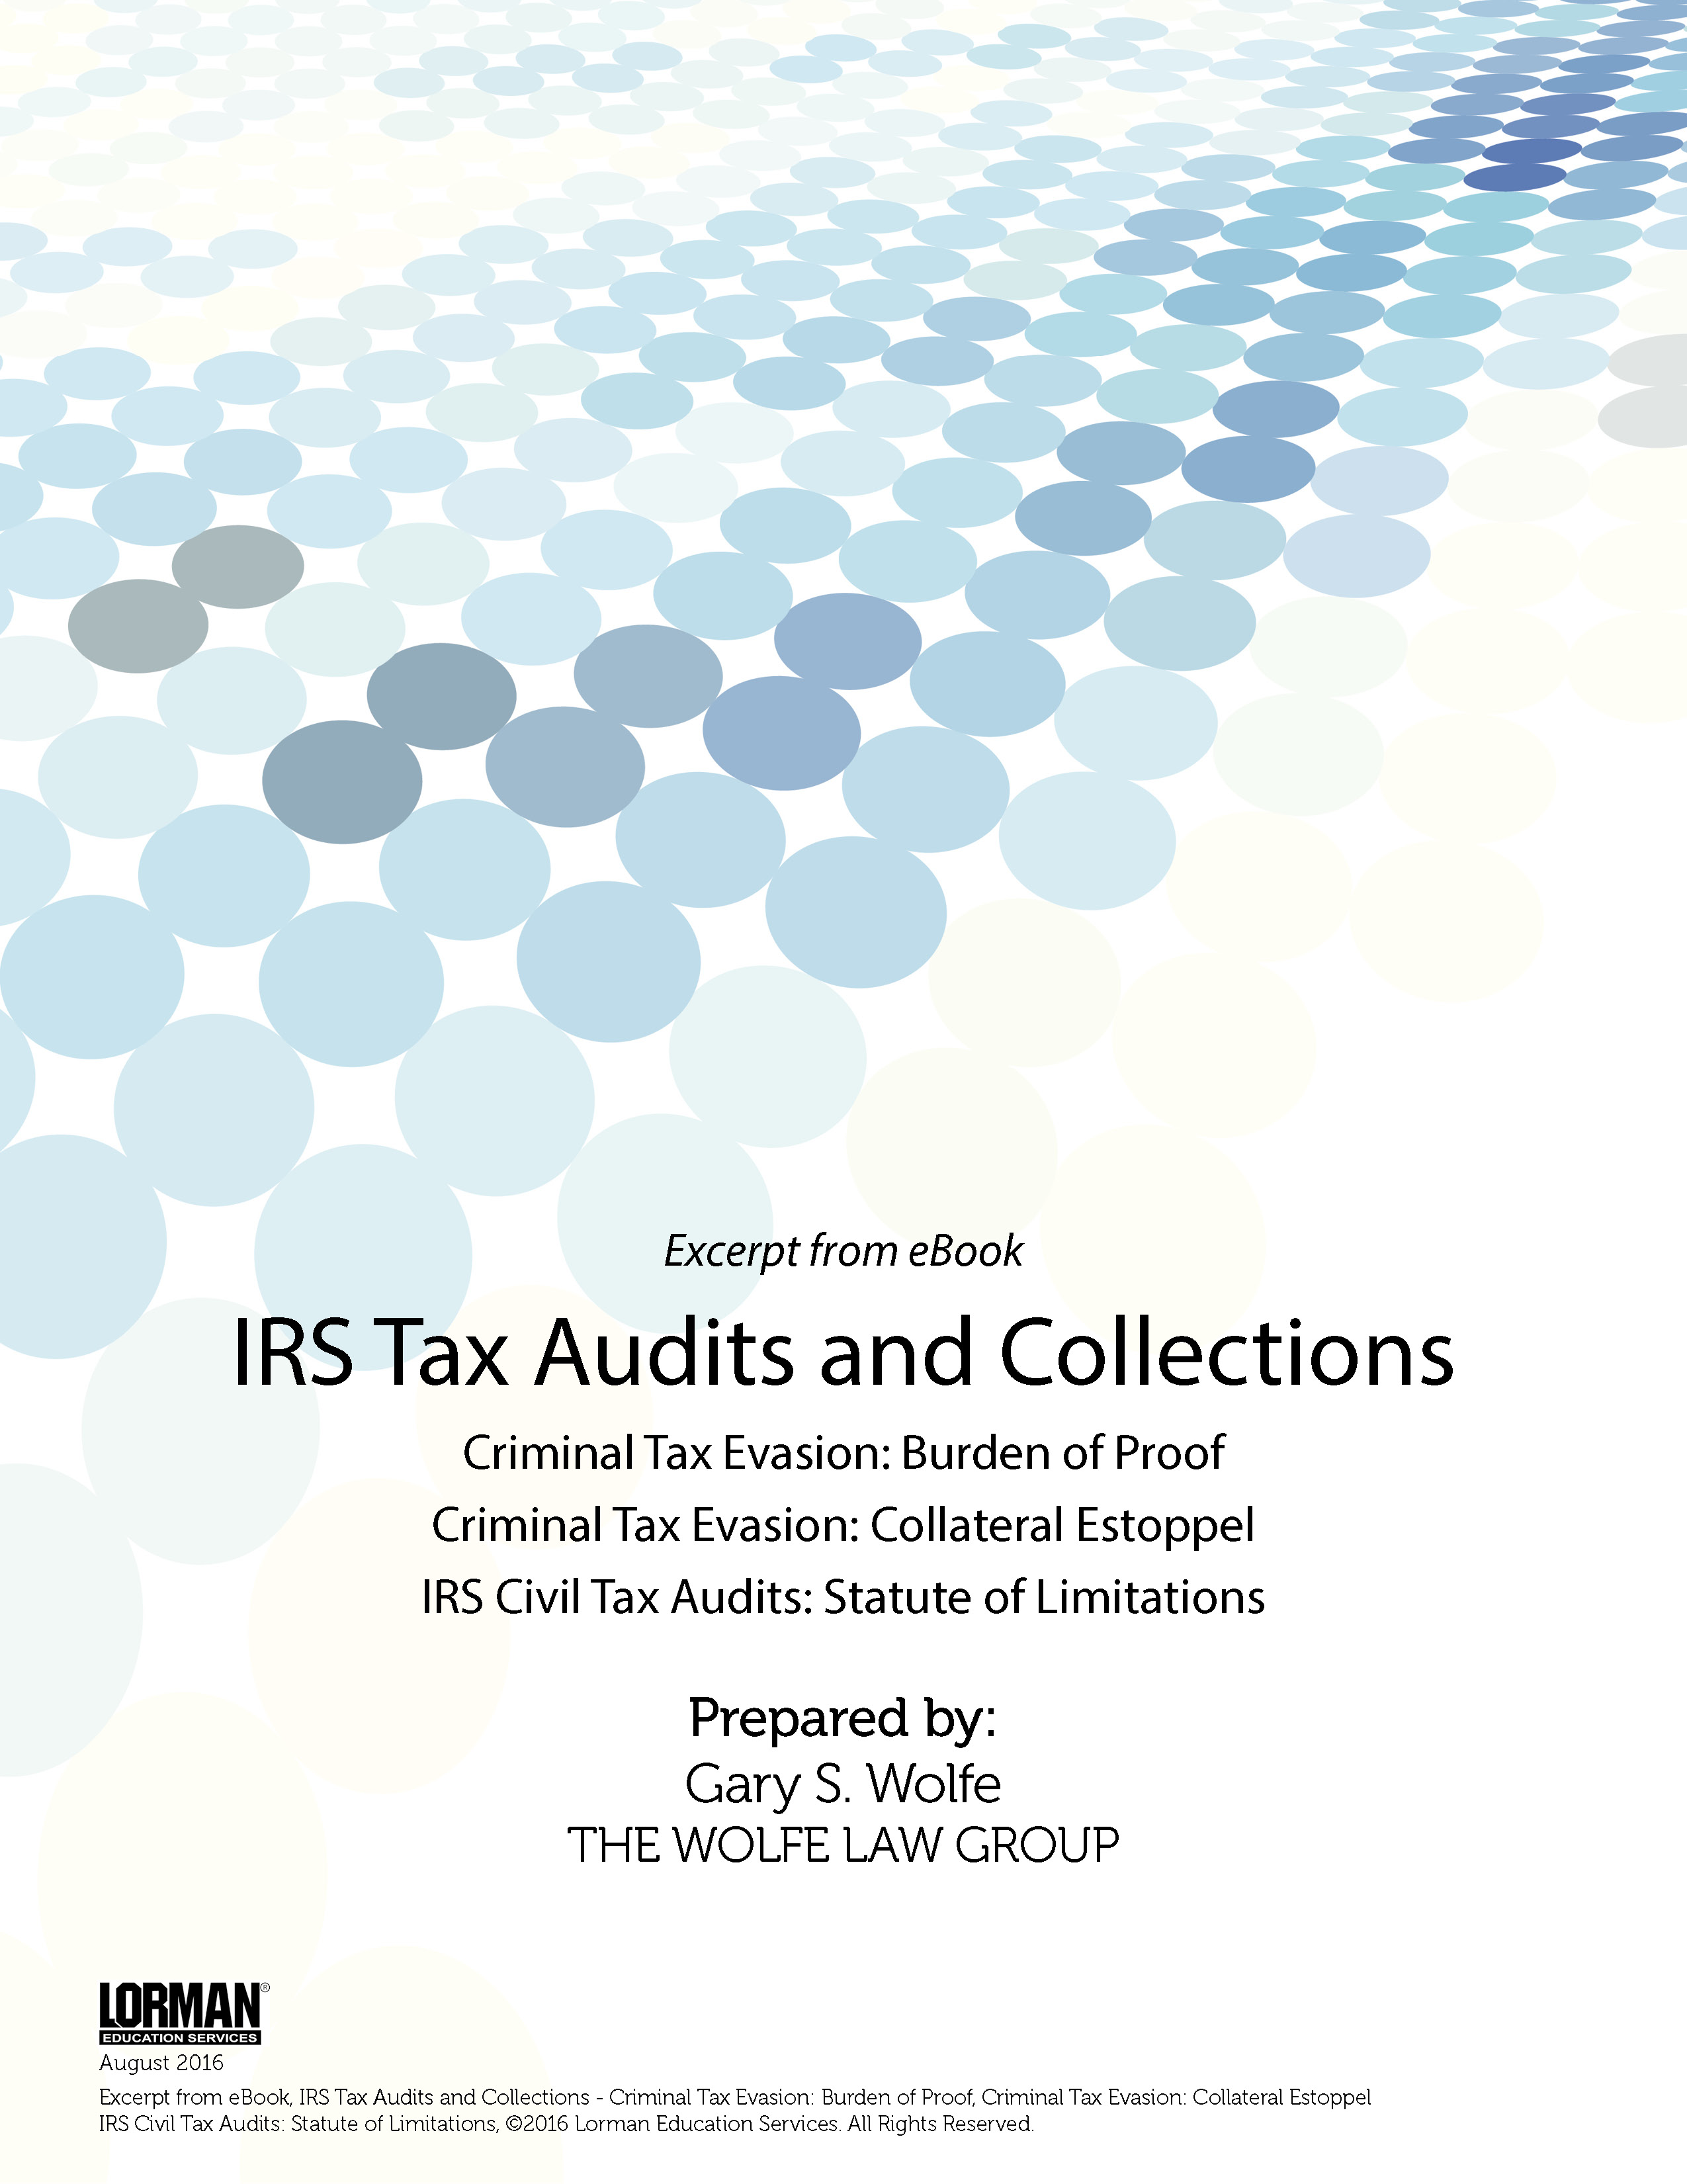 IRS Tax Audits and Collections